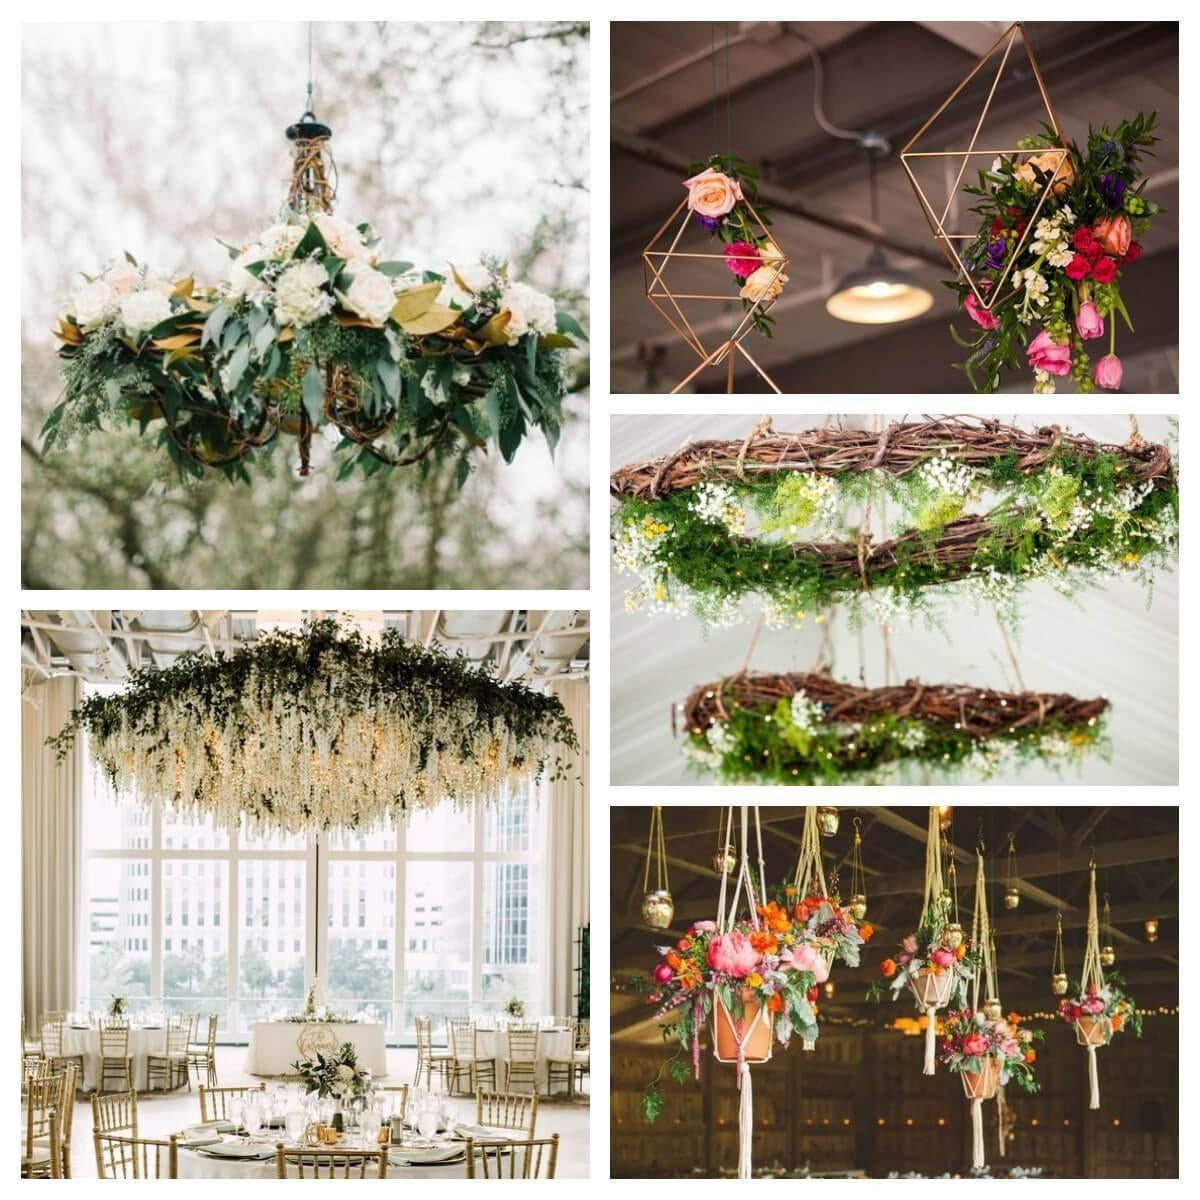 a cascade of flower petals on wire or fishing line  Hanging flowers,  Wedding day inspiration, Floral chandelier